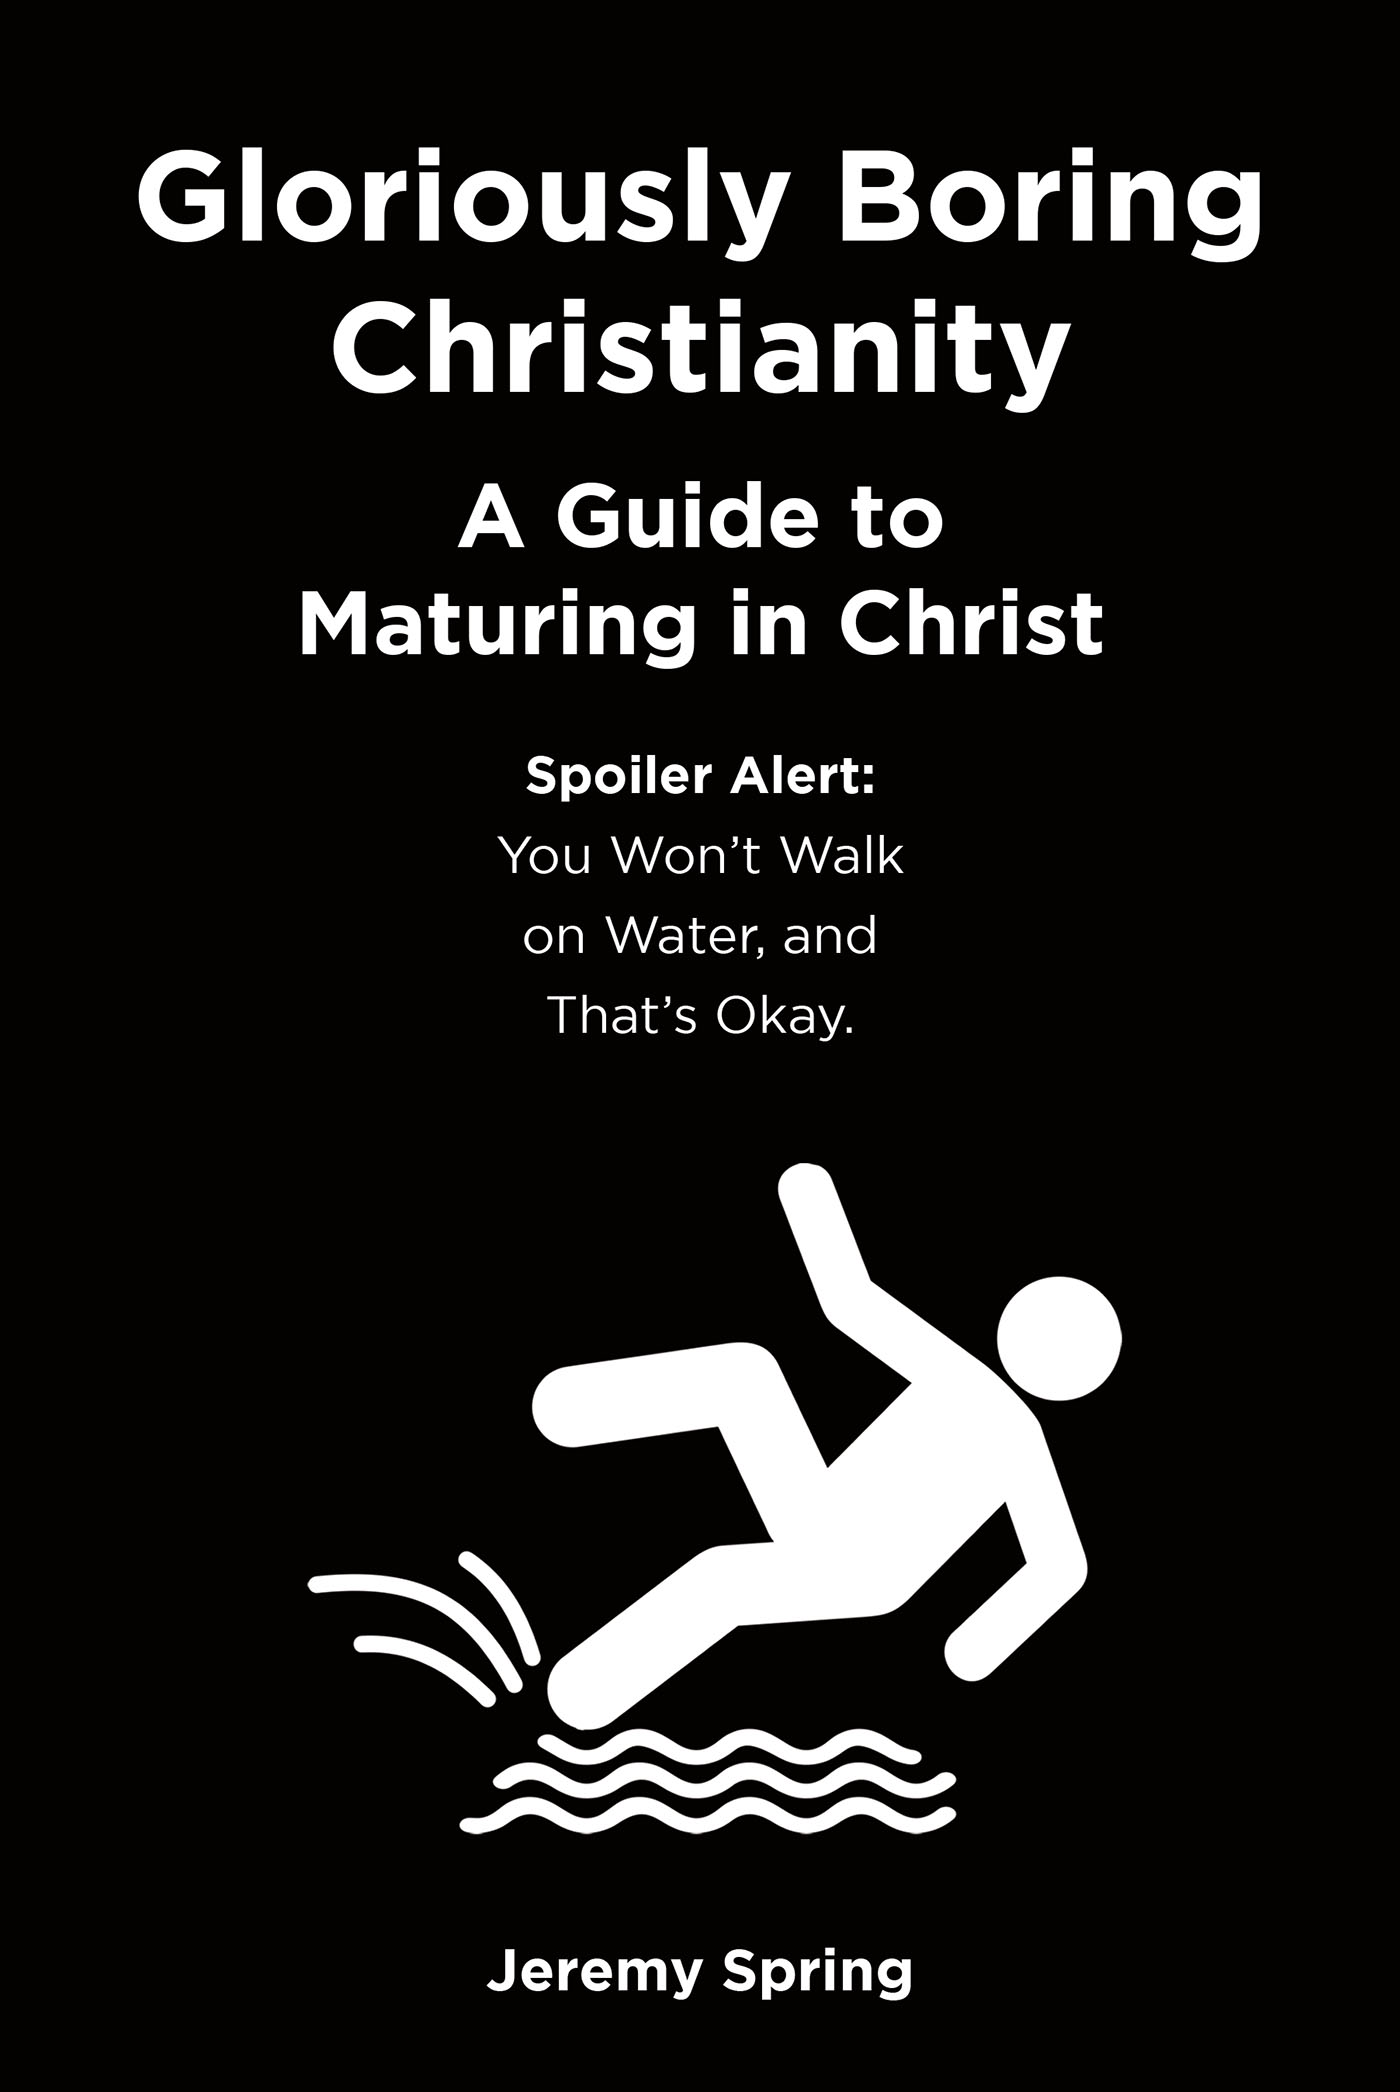 Author Jeremy Spring’s New Book "Gloriously Boring Christianity: A Guide to Maturing in Christ" Attempts to Help Readers Understand Their Faith and Relationship with God